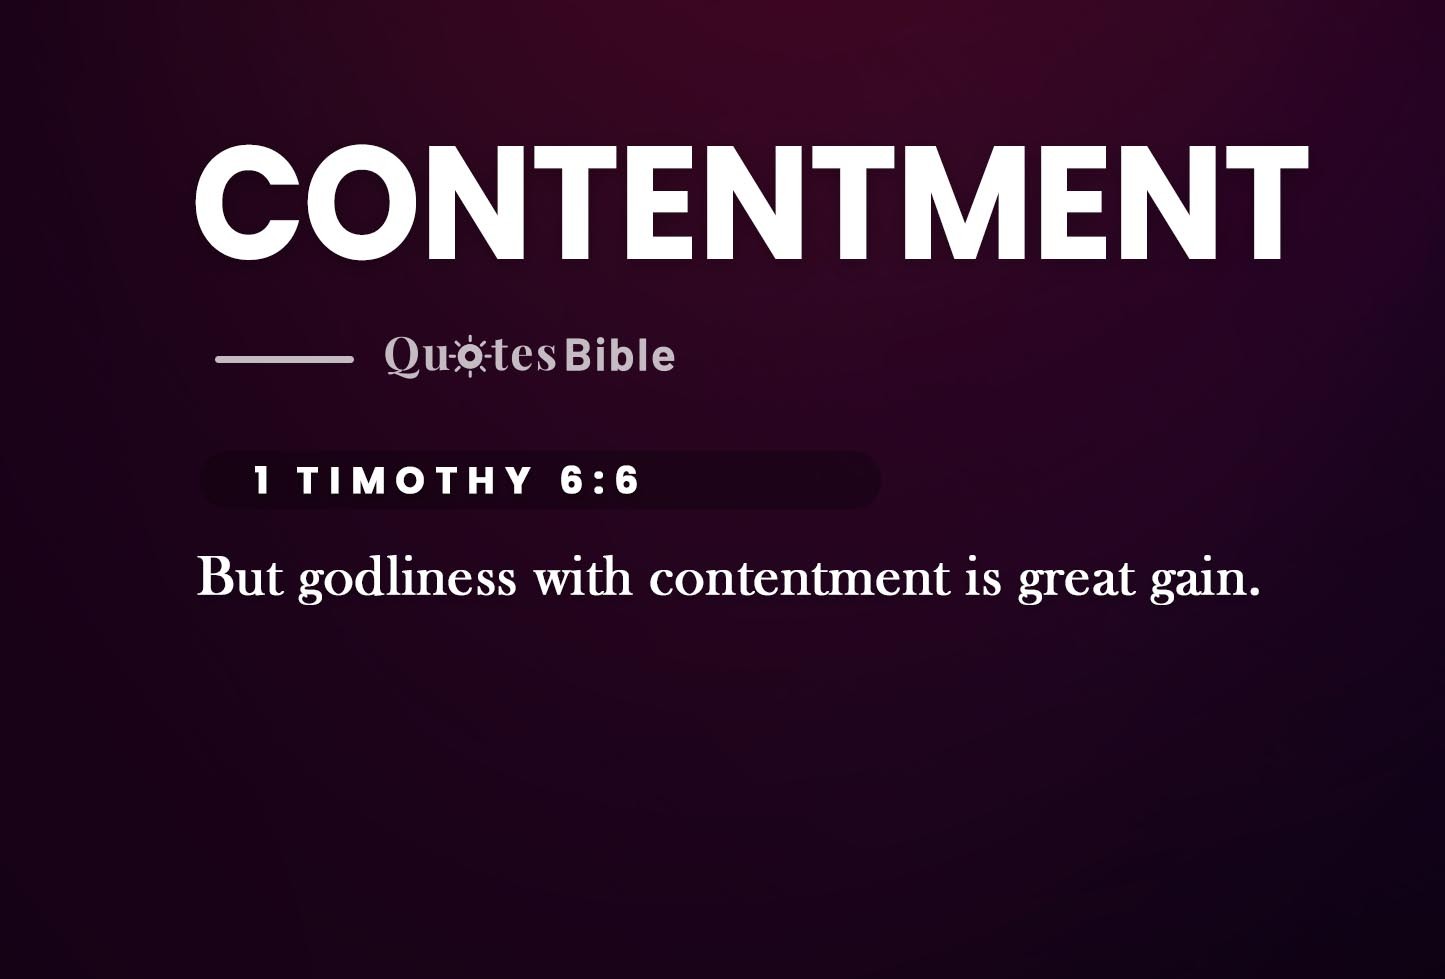 contentment bible verses quote